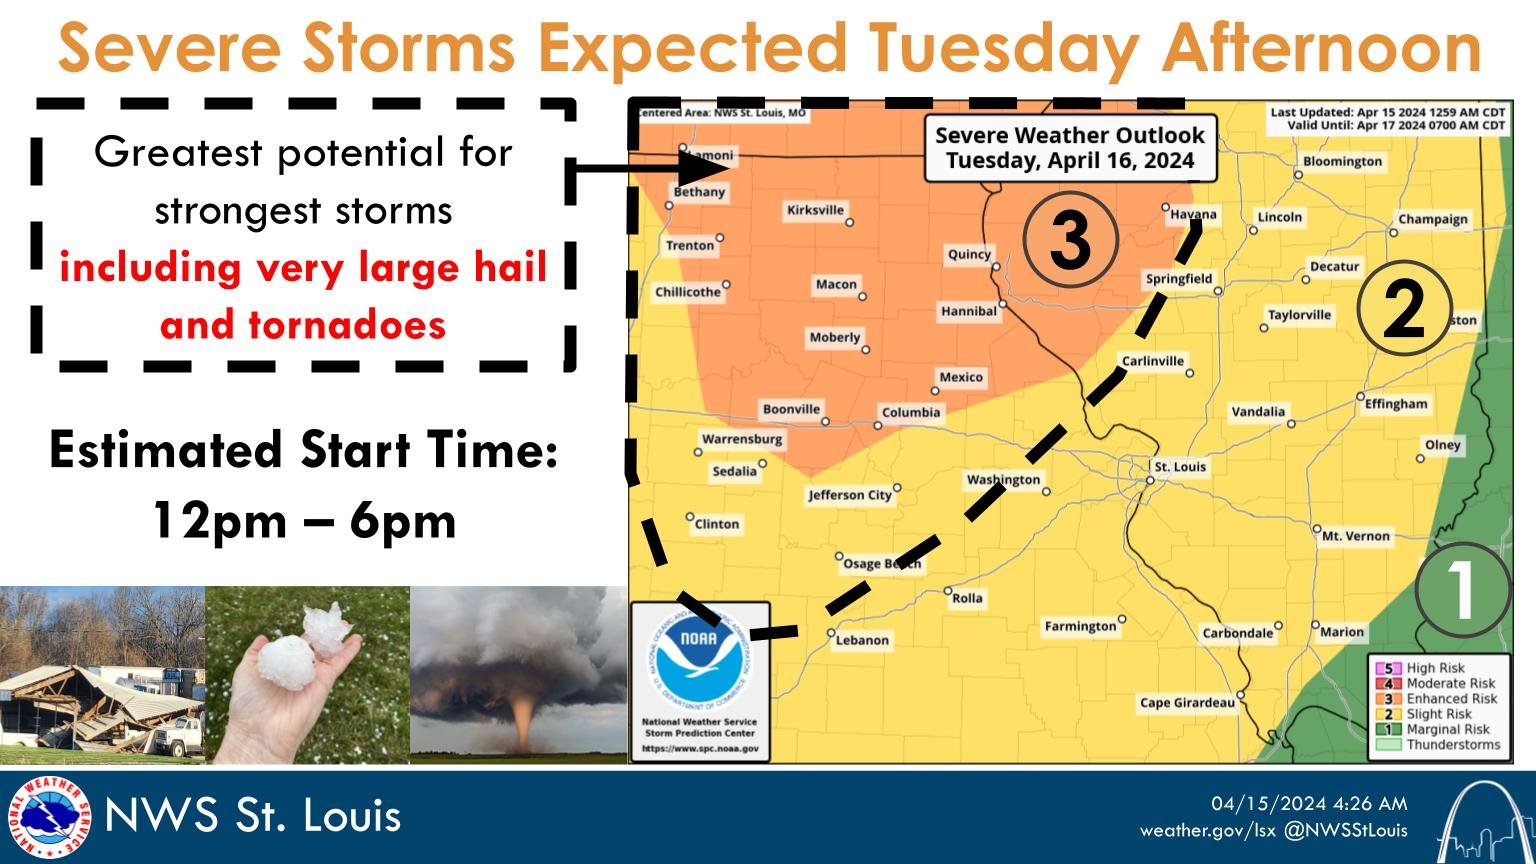 UPDATE: Tornadoes and large hail possible in mid-Missouri on Tuesday